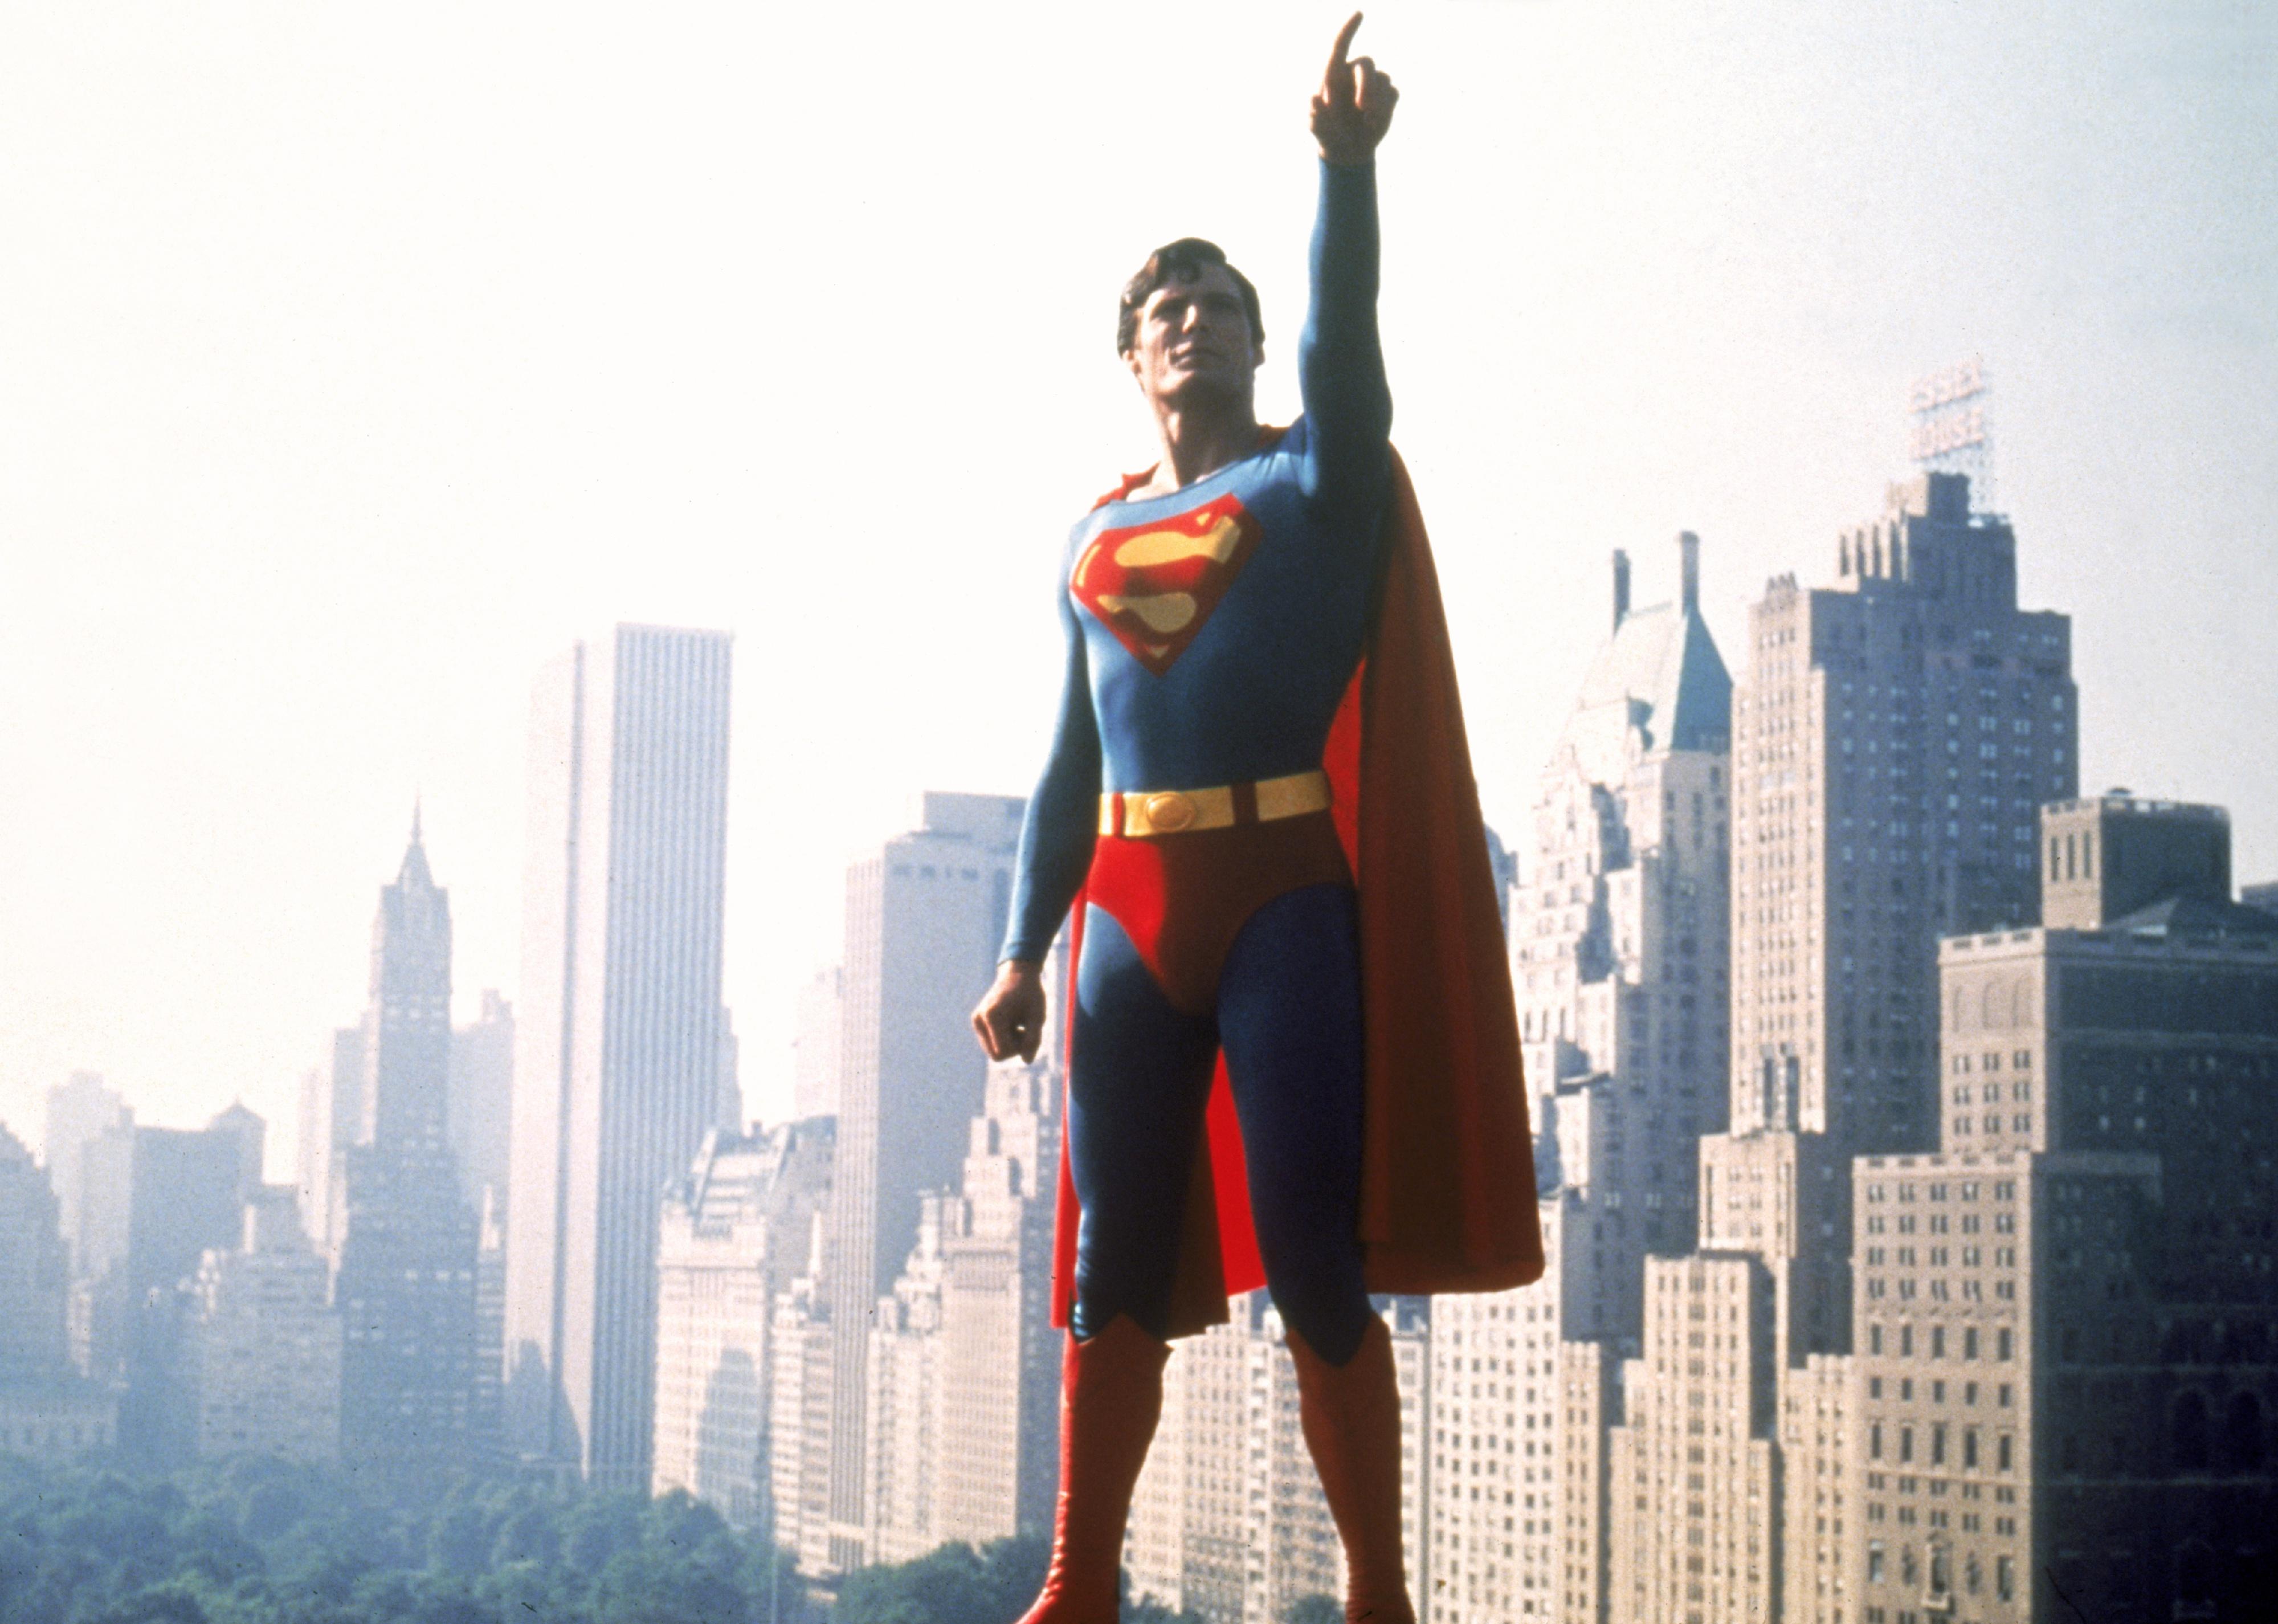 Christopher Reeve, as Superman, with a city skyline in the background.